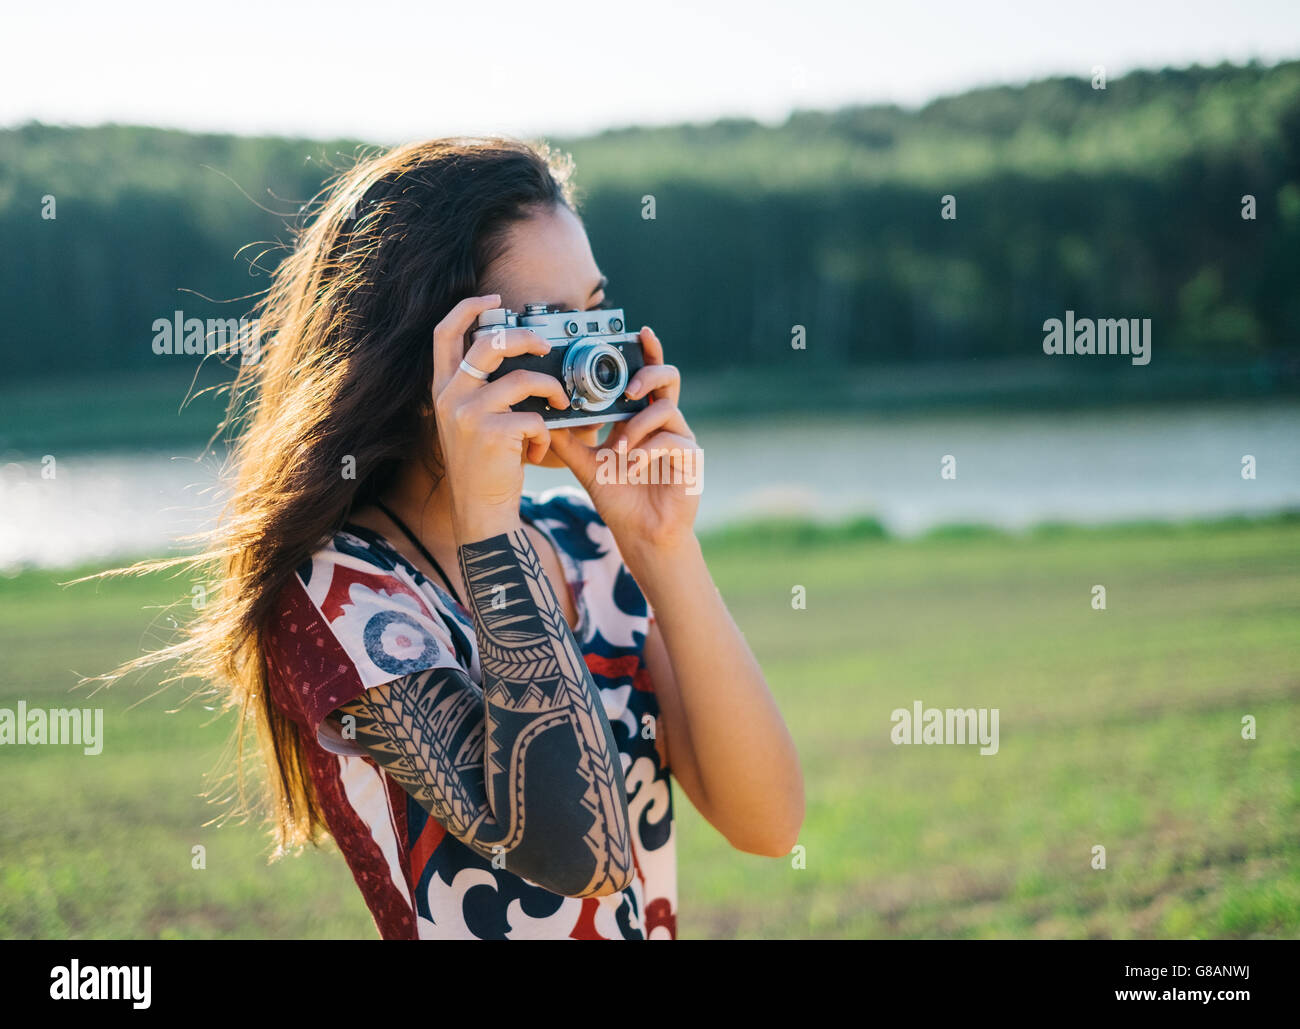 Woman with tattoo taking a photo Stock Photo